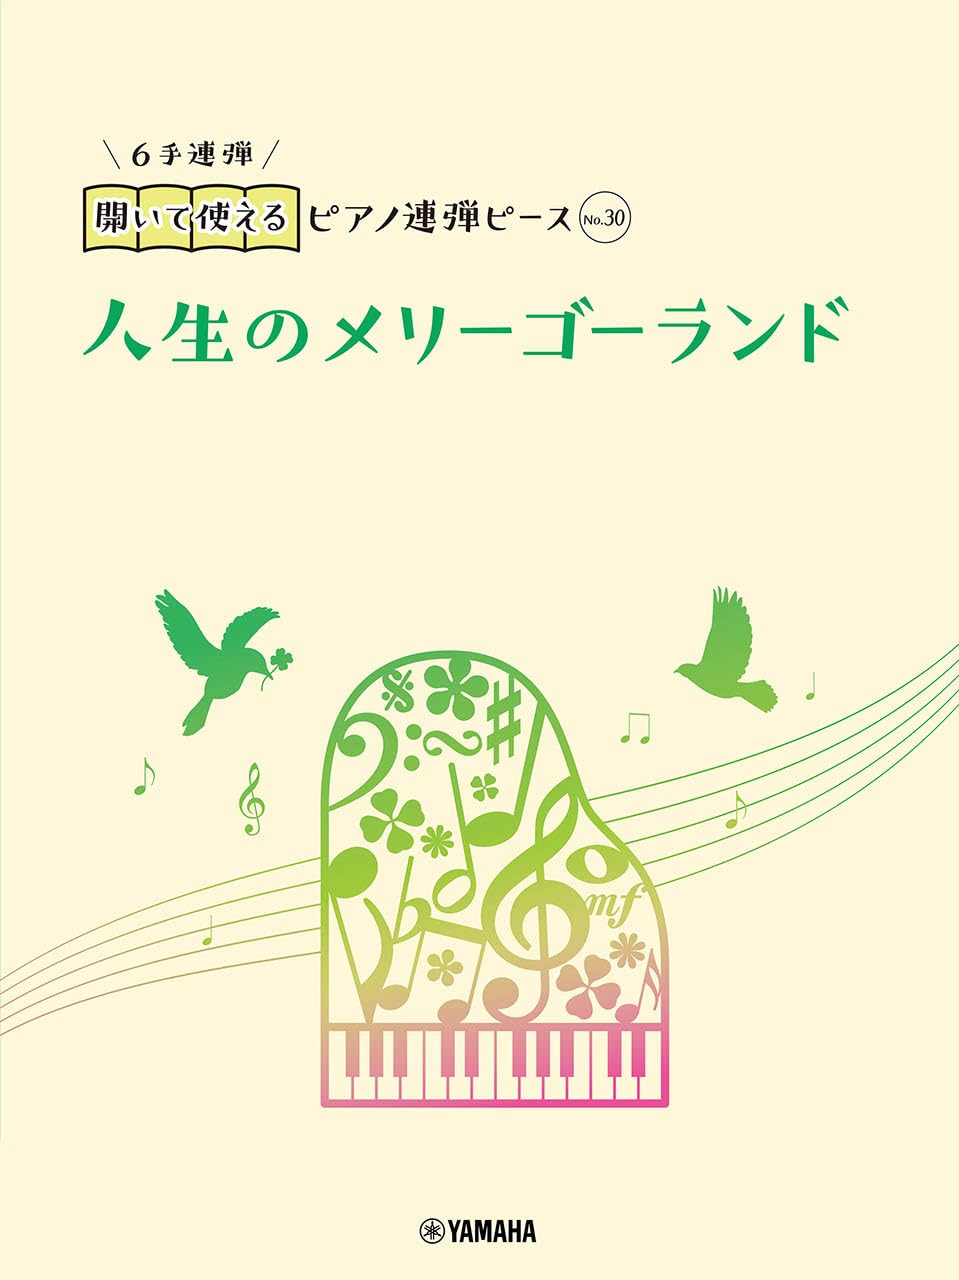 No Page Turning: Studio Ghibli "Merry-Go-Round of Life" from Howl's Moving Castle for Piano Duet